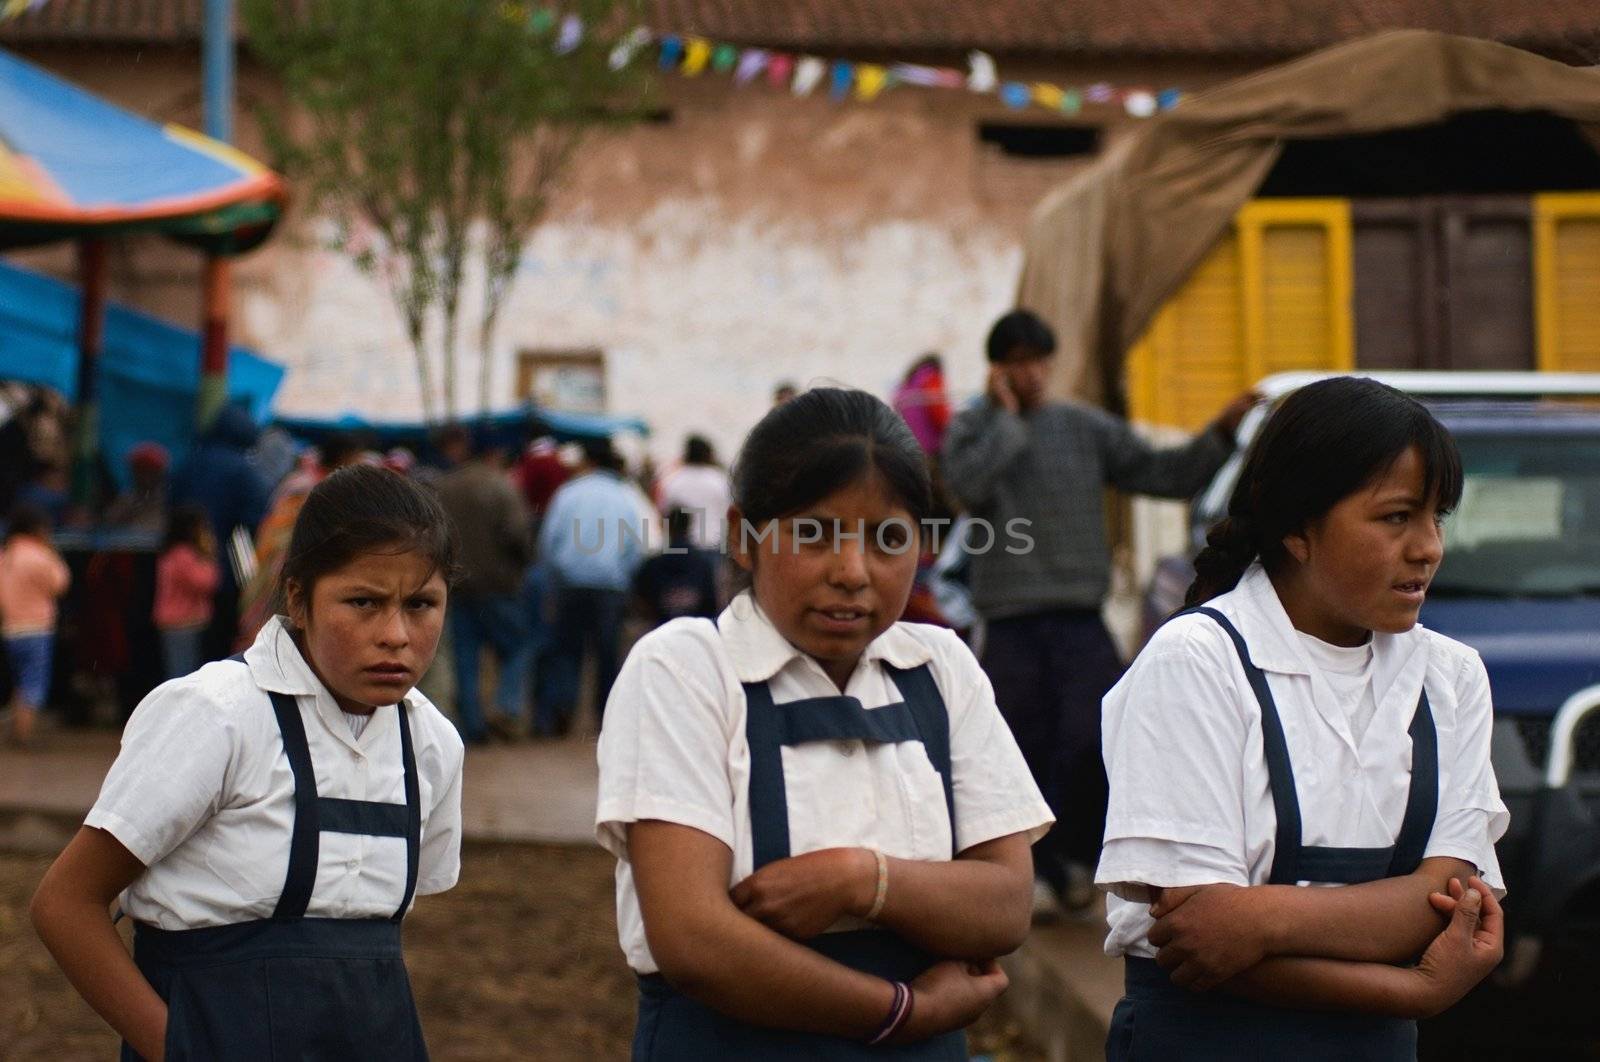 PERU SOUTH AMERICA 2008 JANUARY 2: A portrait of three Peruvian schoolgirls in one high-mountainous small village in the Andes. The Peruvian schoolgirls have come on the rural area to the day off. Village in the Andes. On January 2nd 2008. 